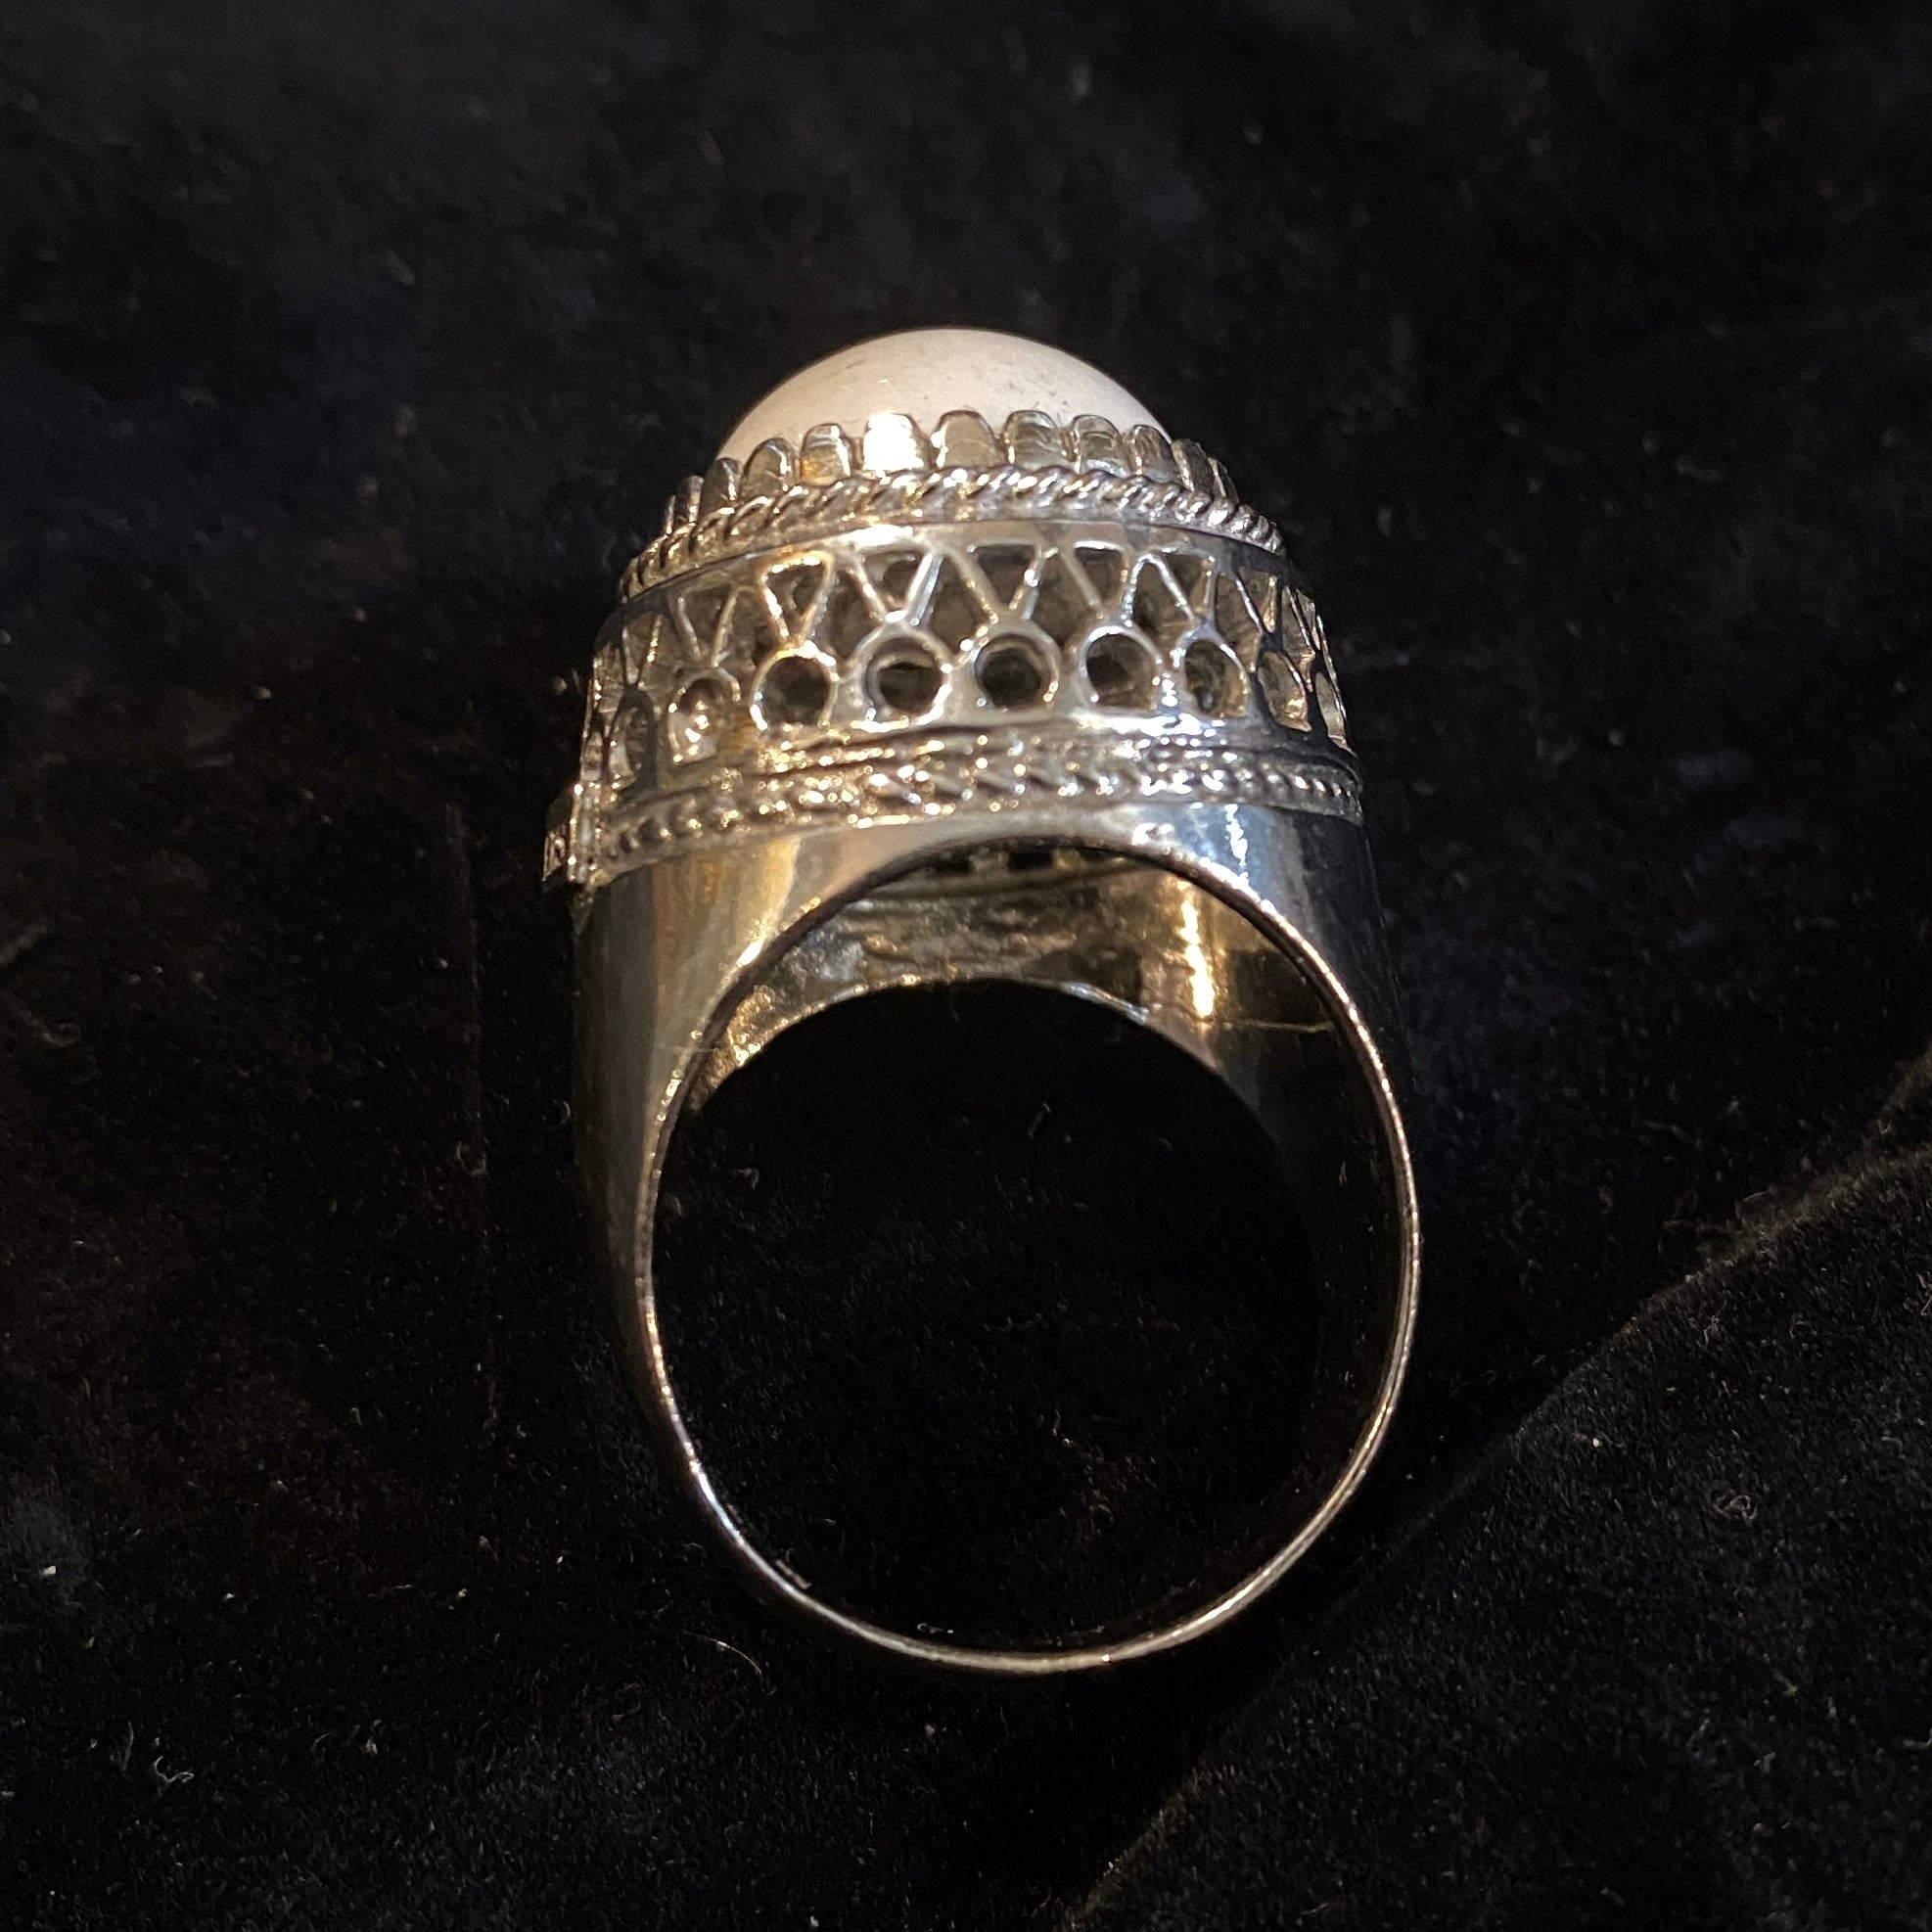 A vintage cocktail ring designed and handcrafted in Italy by Anomis in the Nineties, it has been worked as a real jewel, sterling silver and agate are in perfect conditions, it has been never used. The Ring by Anomis is a beautiful and unique piece